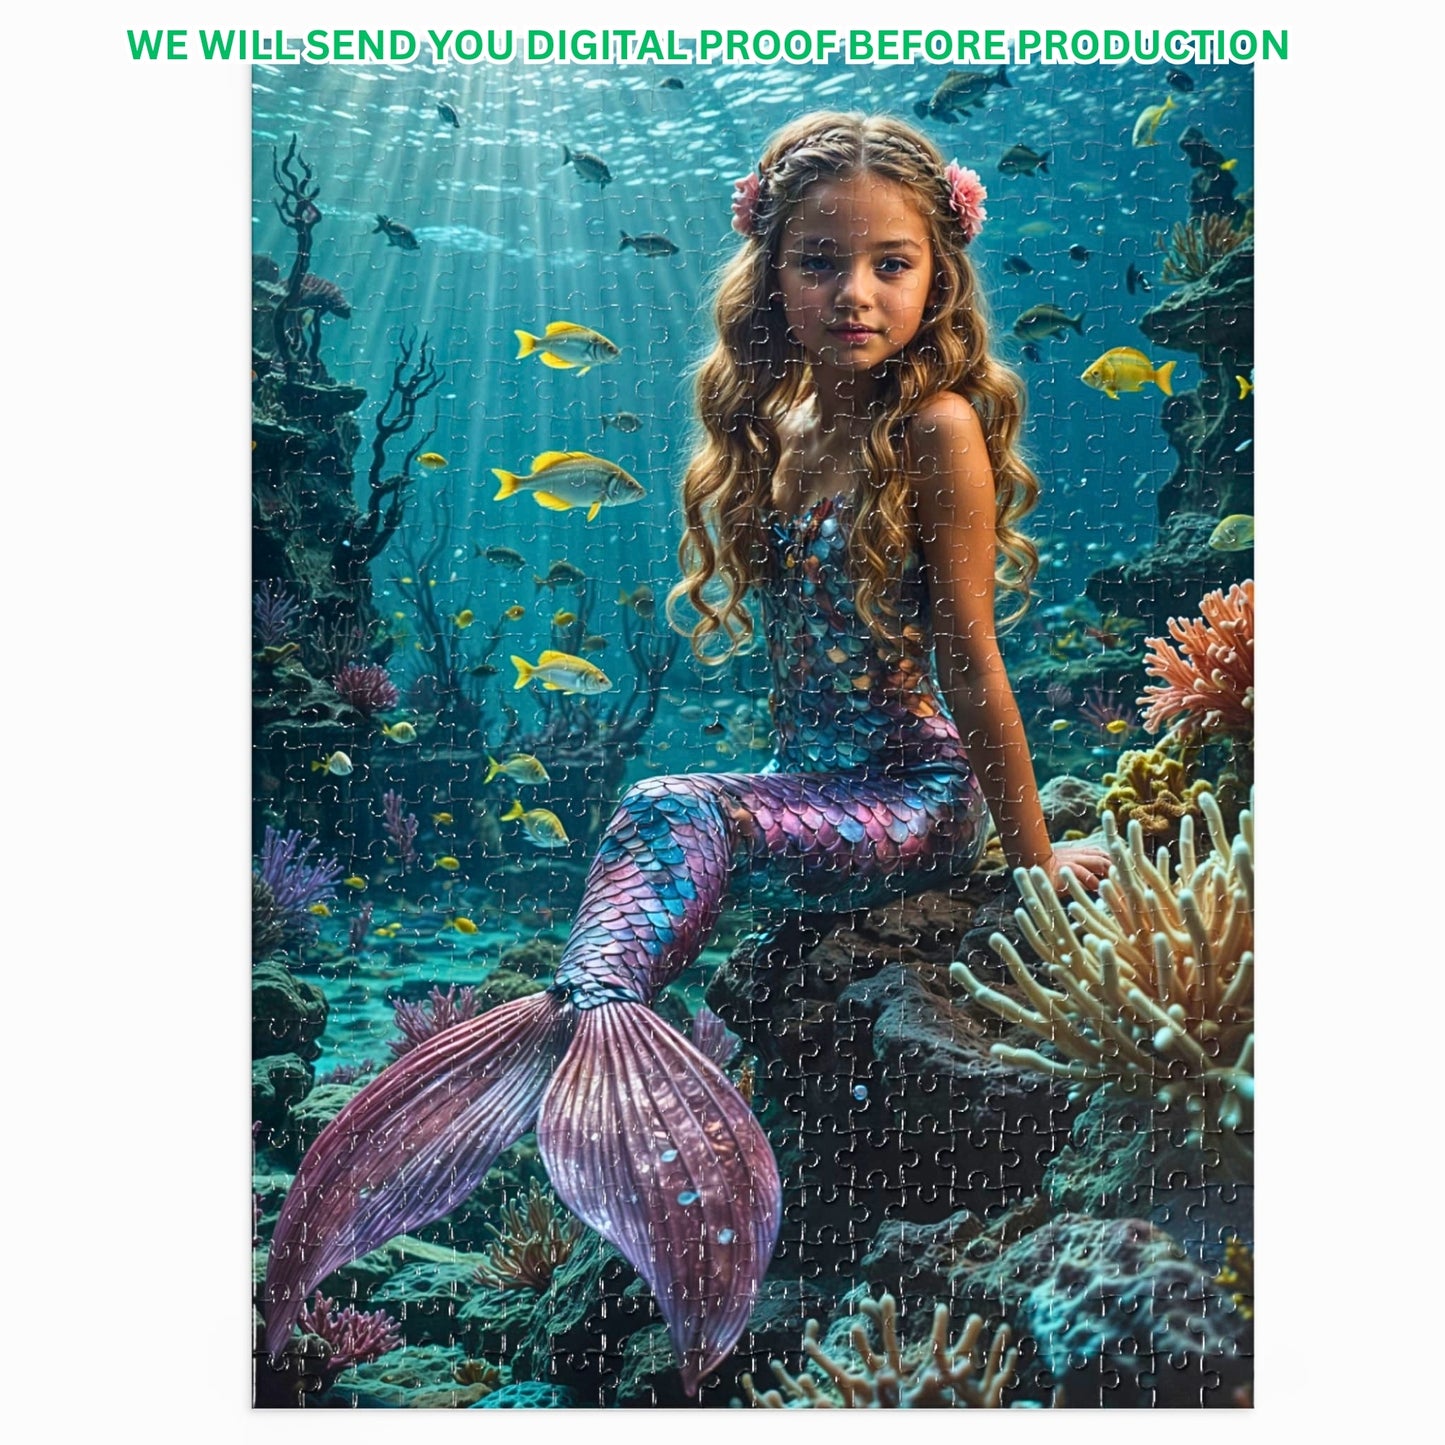 Custom Mermaid Puzzle from Photo, Personalized Little Mermaid Puzzle, Custom Princess Portrait, Mermaid Gifts, Princess Birthday Gift, Custom Photo Puzzle, Unique Mermaid Puzzle, Custom Puzzle for Girls, Mermaid Birthday Puzzle, Personalized Princess Gift, Custom Mermaid Art, Princess Photo Gift, Custom Mermaid Portrait, Birthday Puzzle Gift, Mermaid Photo Gift, Personalized Mermaid Gift, Custom Birthday Puzzle, Princess Photo Puzzle.